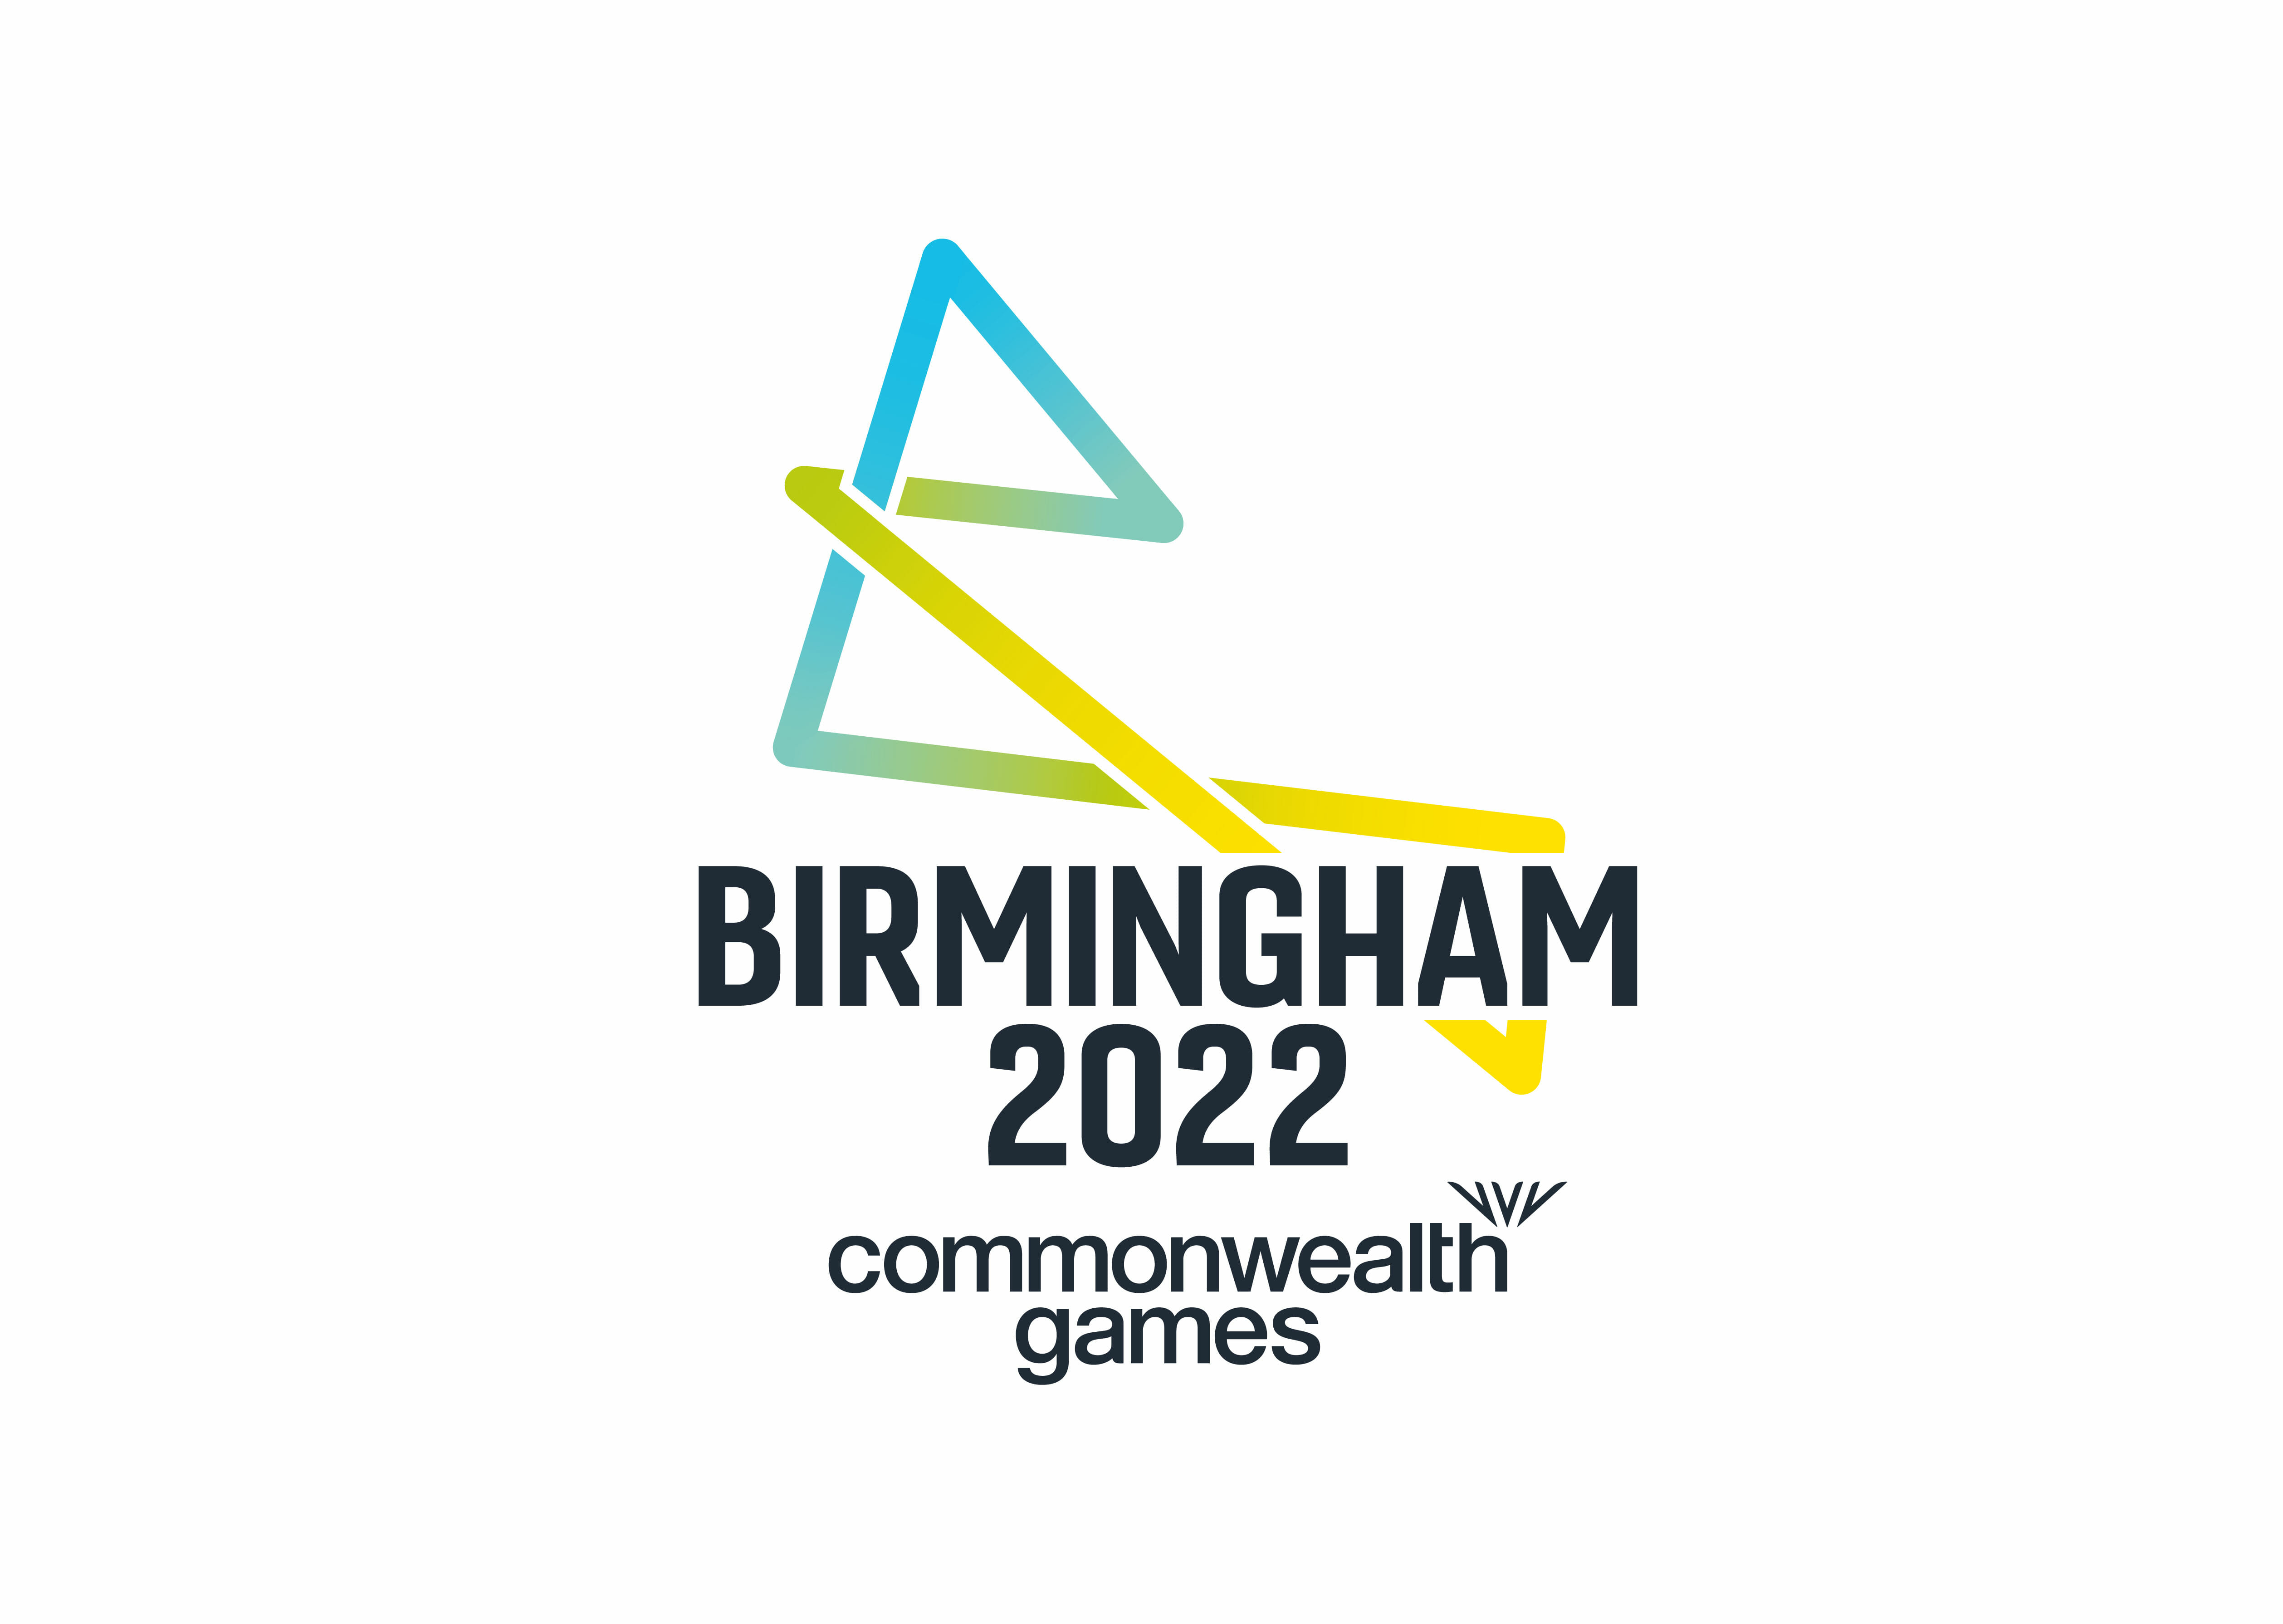 Birmingham 2022 Commonwealth Games daily sports schedule unveiled